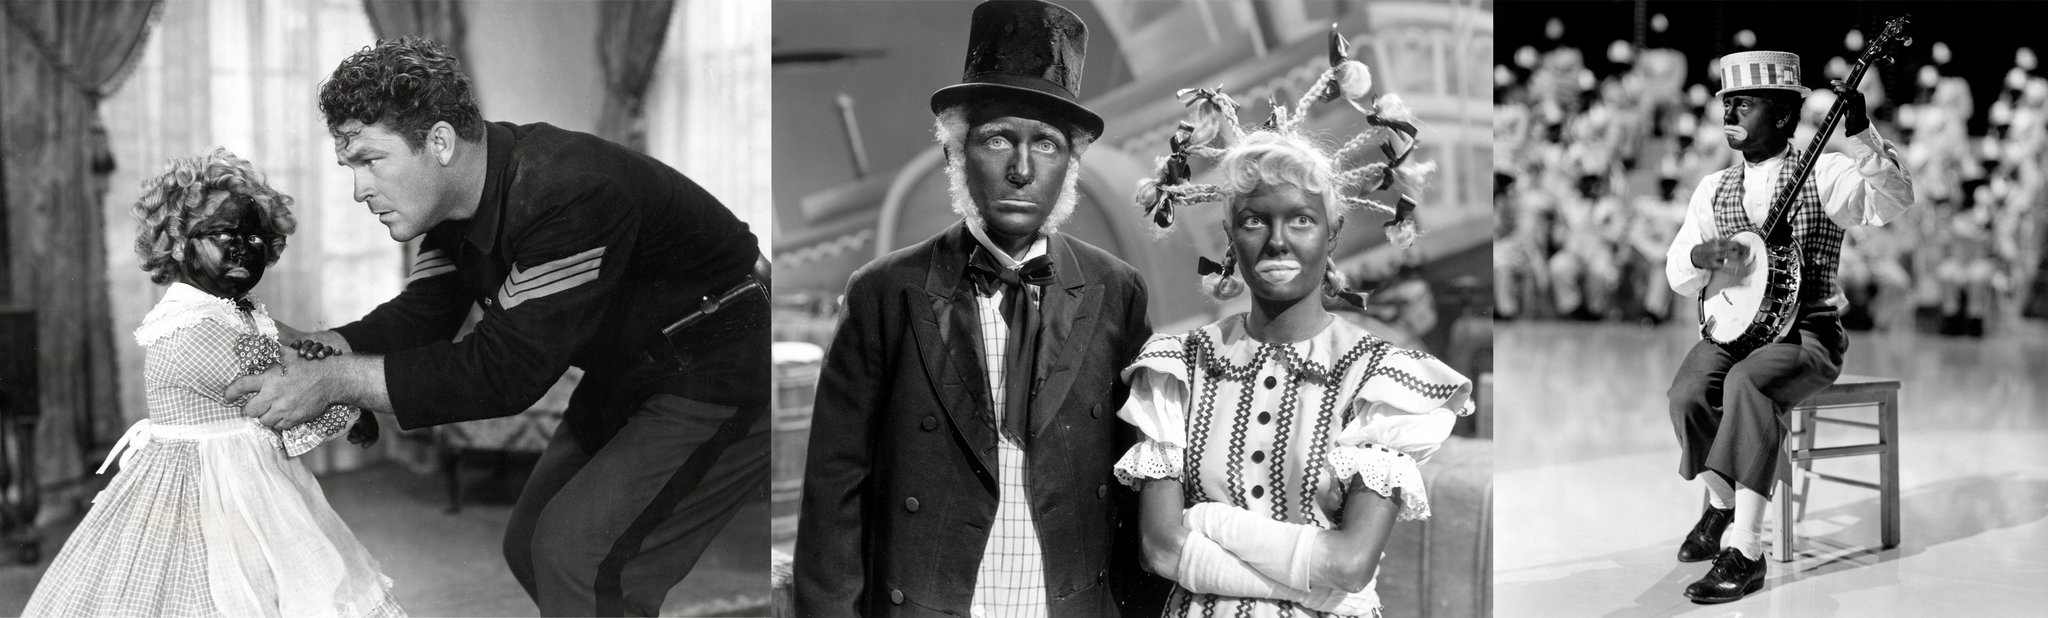 Shirley Temple (with Guinn 'Big Boy' Williams - The Littlest Rebel - 1935), Bing Crosby and Marjorie Reynolds (White Christmas - 1954), and Mickey Rooney (Babes on Broadway - 1941); all in blackfaces.